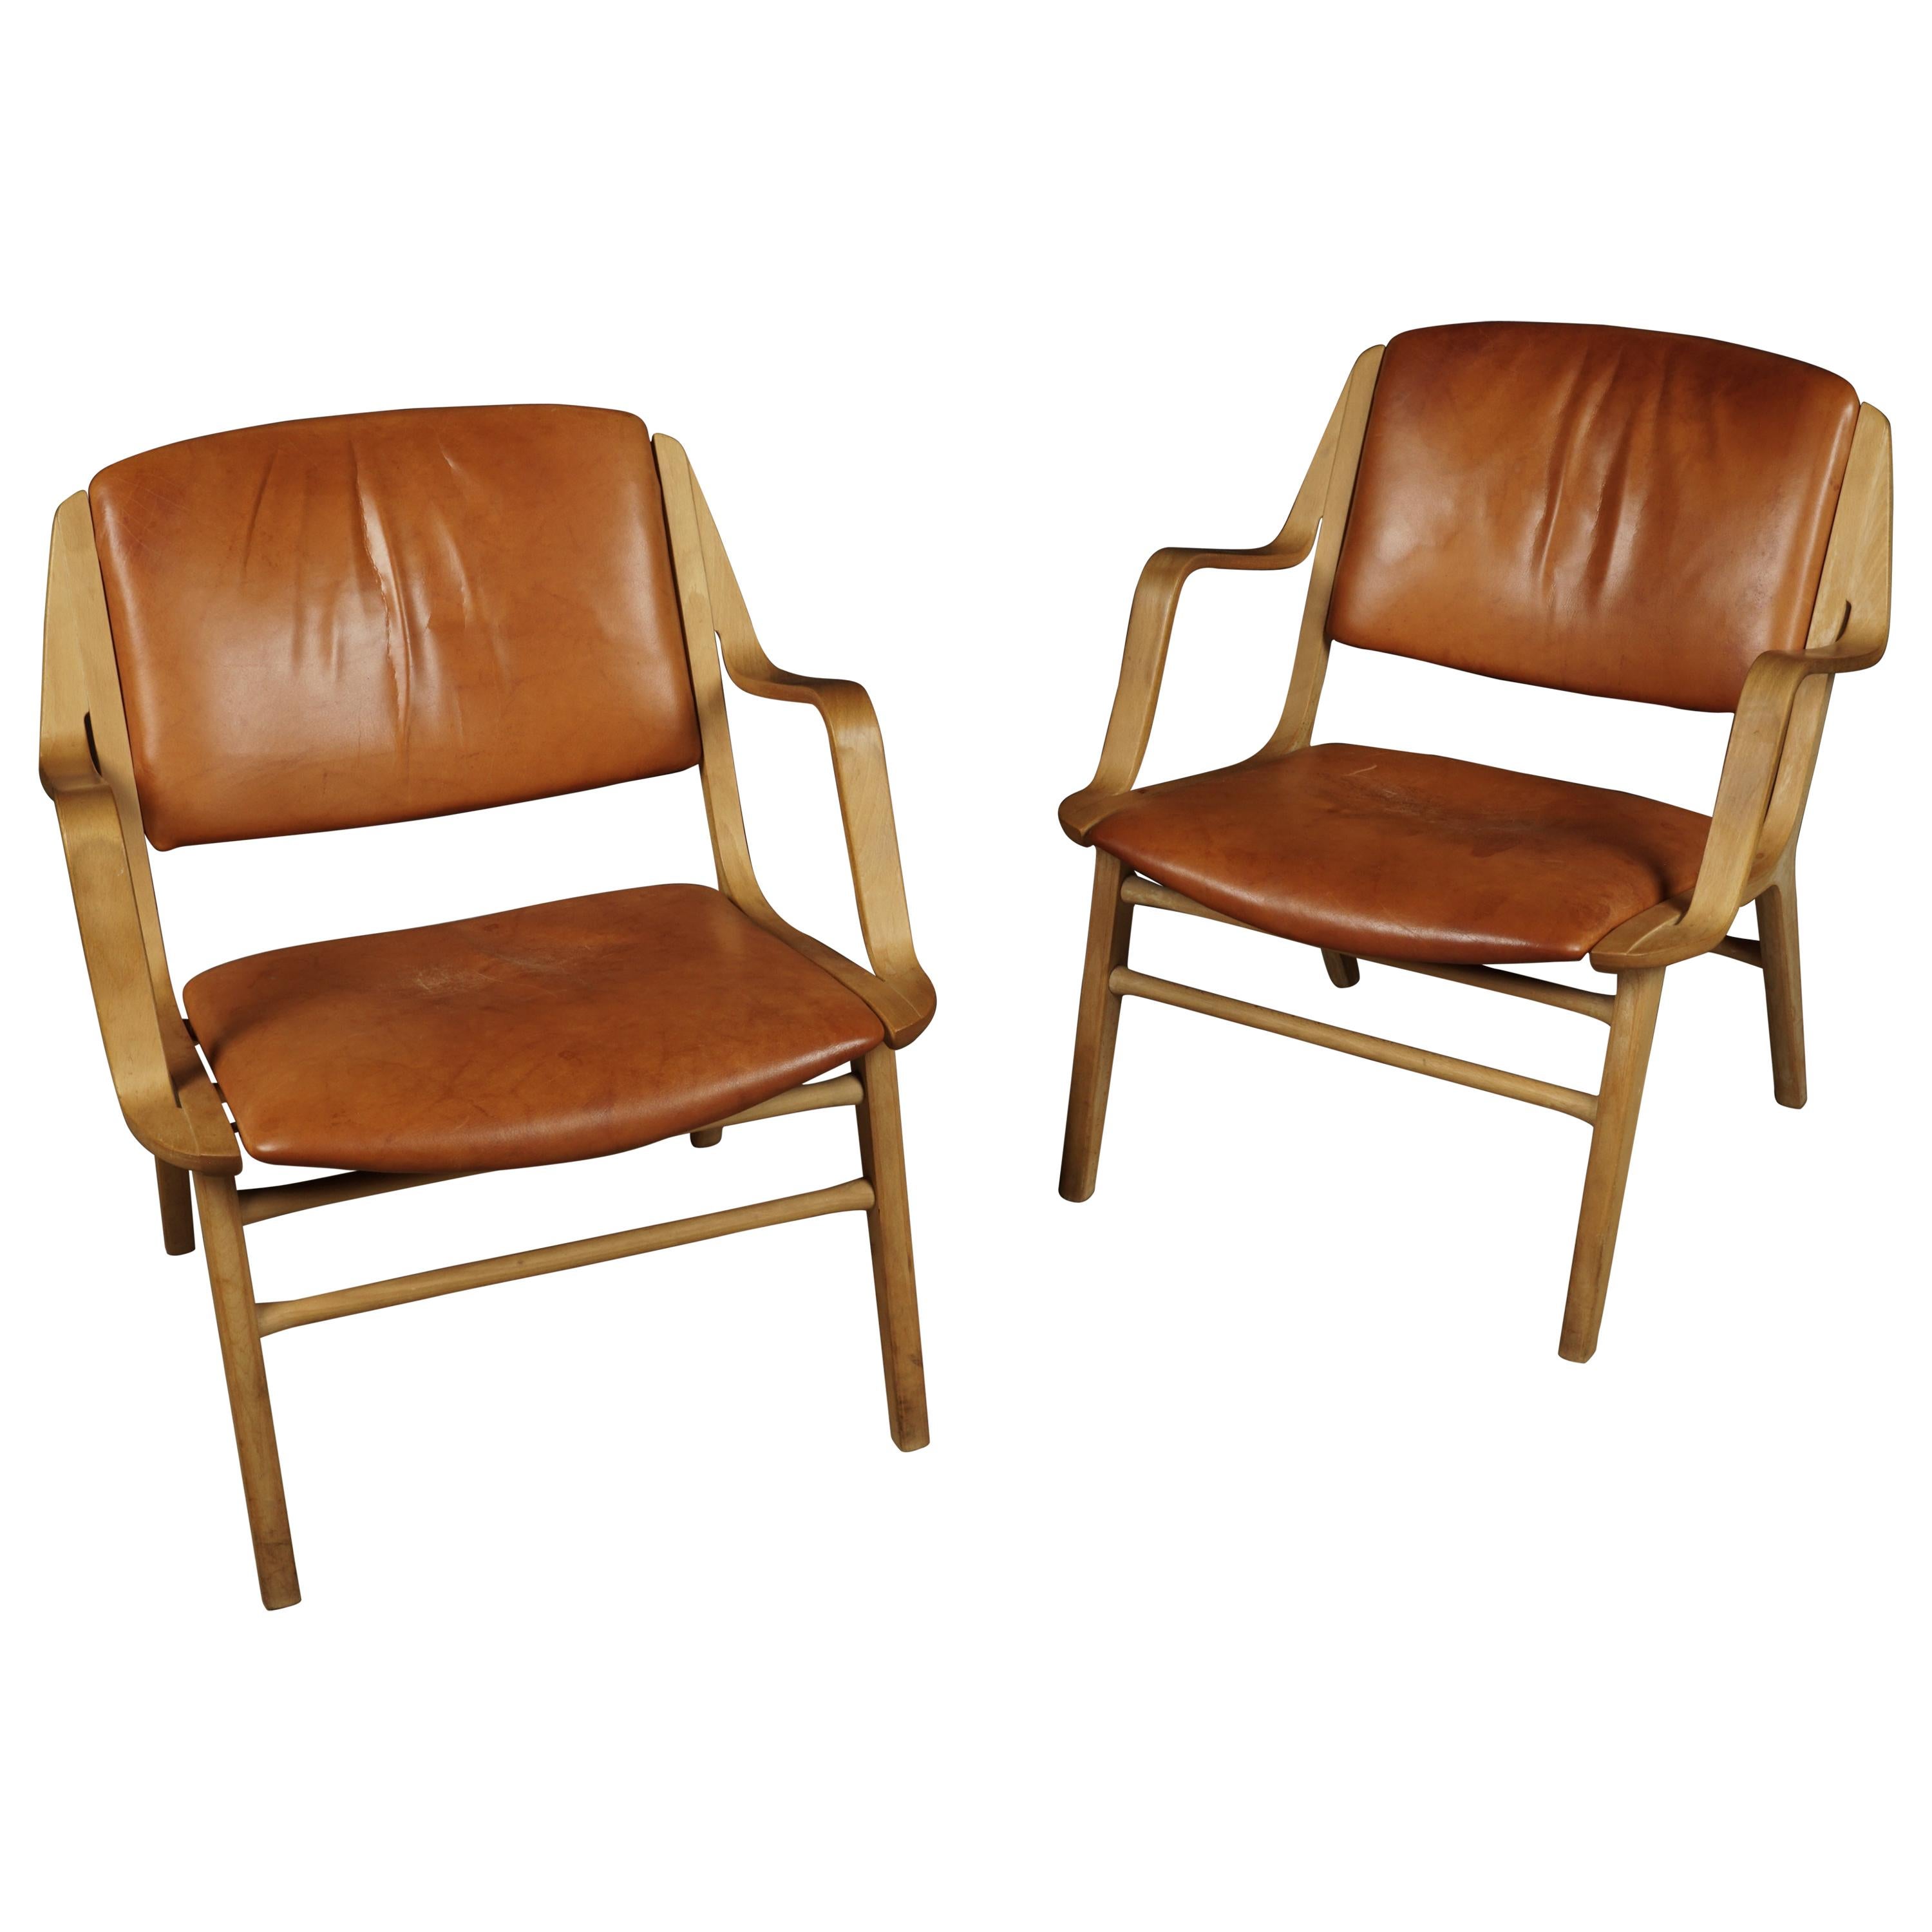 Vintage Pair of "Ax" Lounge Chairs by Peter Hvidt, Denmark, 1970s